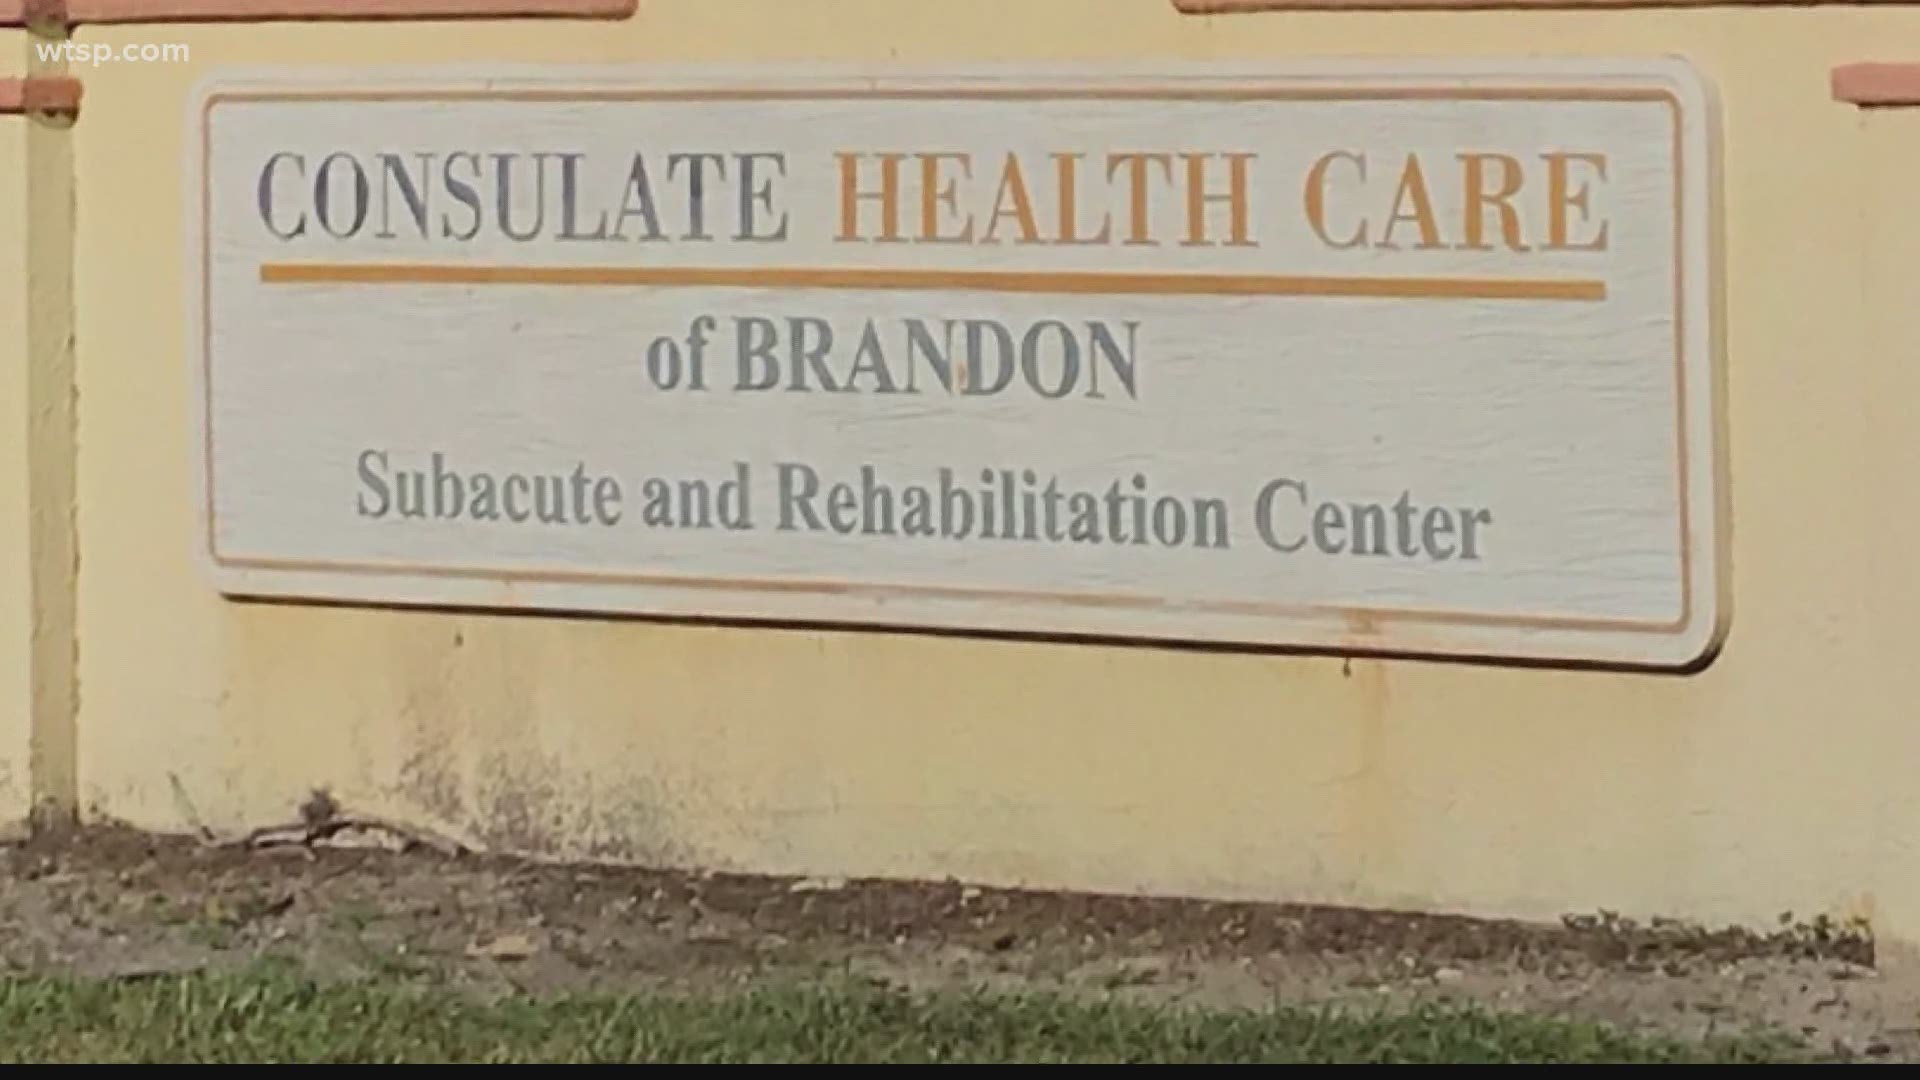 Congress is demanding Consulate Health Care in Brandon to send documents and other information about its actions to protect vulnerable Americans in nursing homes.